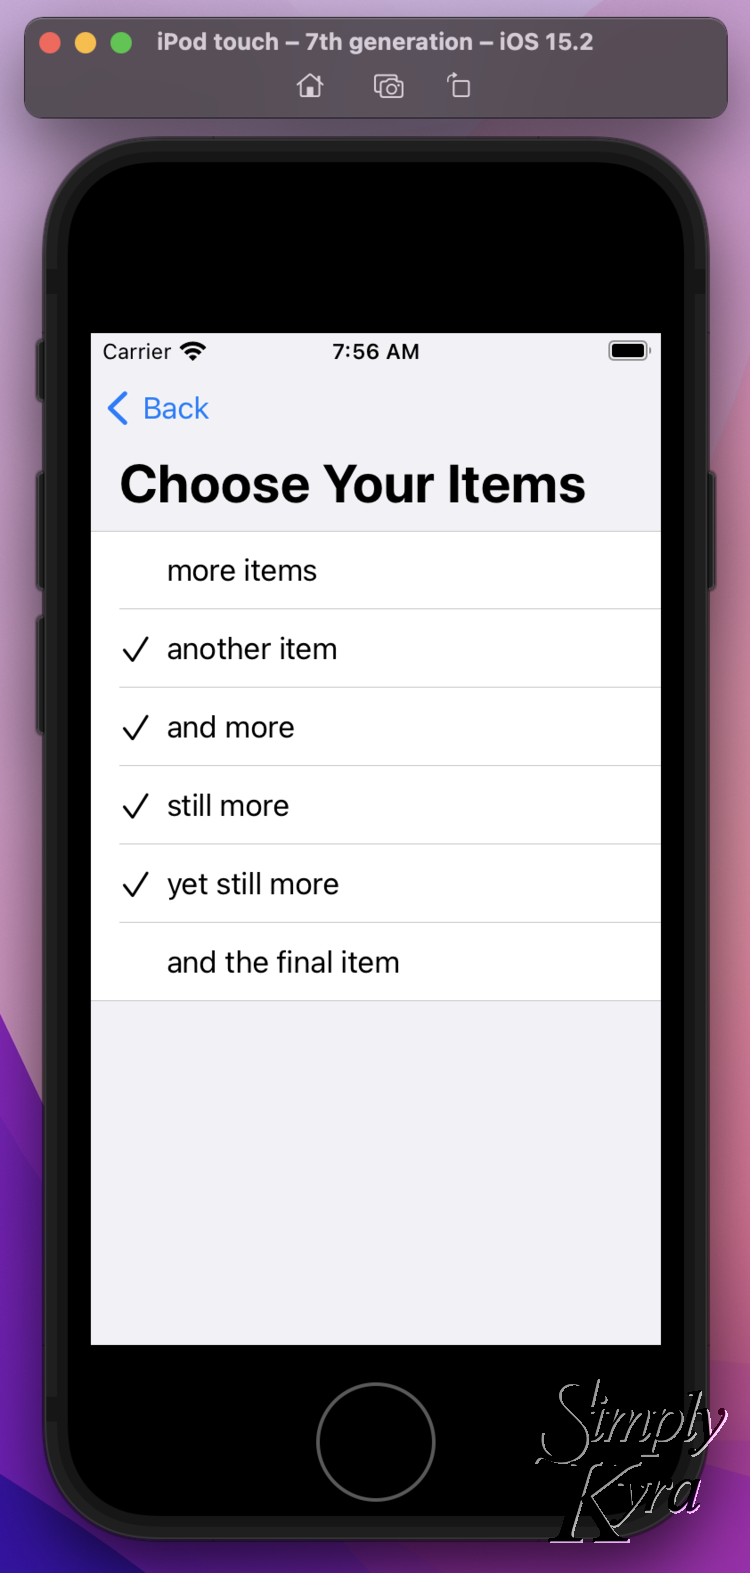 Image shows the same simulator as the previous photo but now there's a blue back button at the top, a title saying "Choose Your Items", and then the list of items with the four center ones selected.